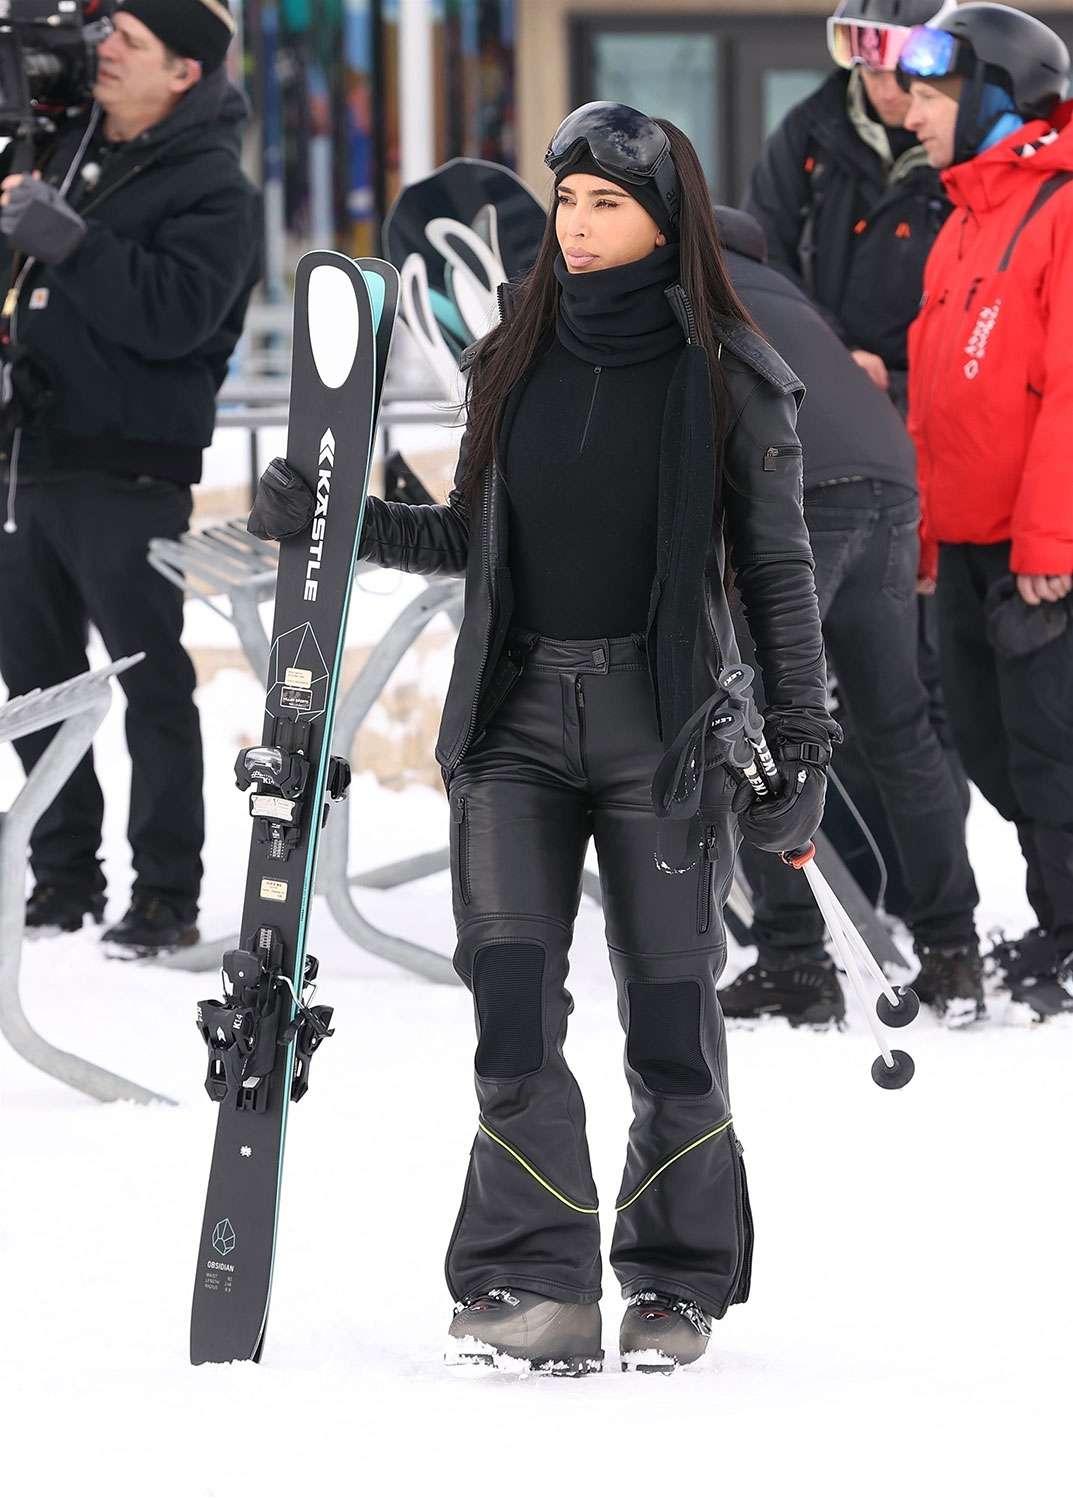 Kim, Kendall and Khloe bring A-LIST style to the slopes as they hit Buttermilk mountain in Aspen Kim was spotted in a full Chanel carrying her OWN skis as she prepared to hit the snow. Khloe meanwhile sported Balenciaga with a ADORABLE CAT EAR helmet as the sisters spent a days skiing with Corey and Kris.